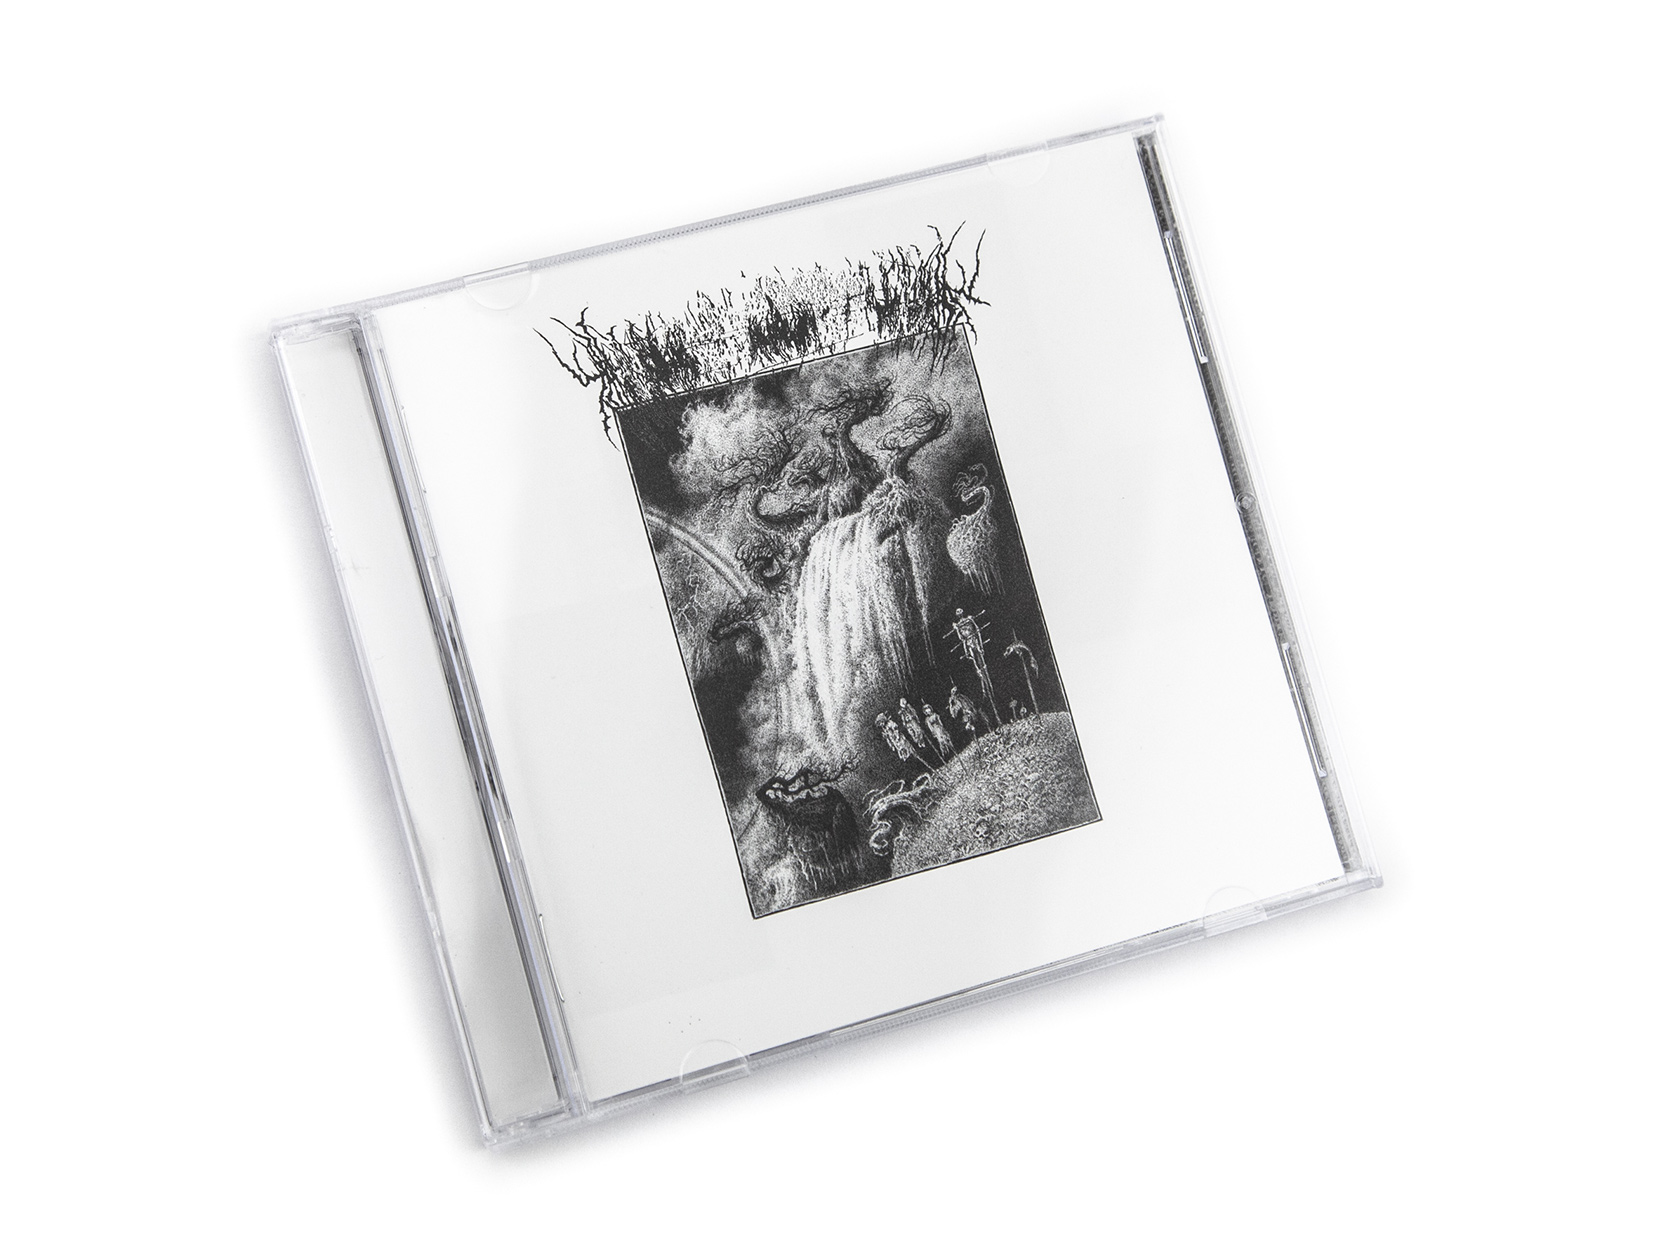 City and i.o are back with a captivating, full-length album titled ‘Chaos is God Neighbour’ on Éditions Appærent